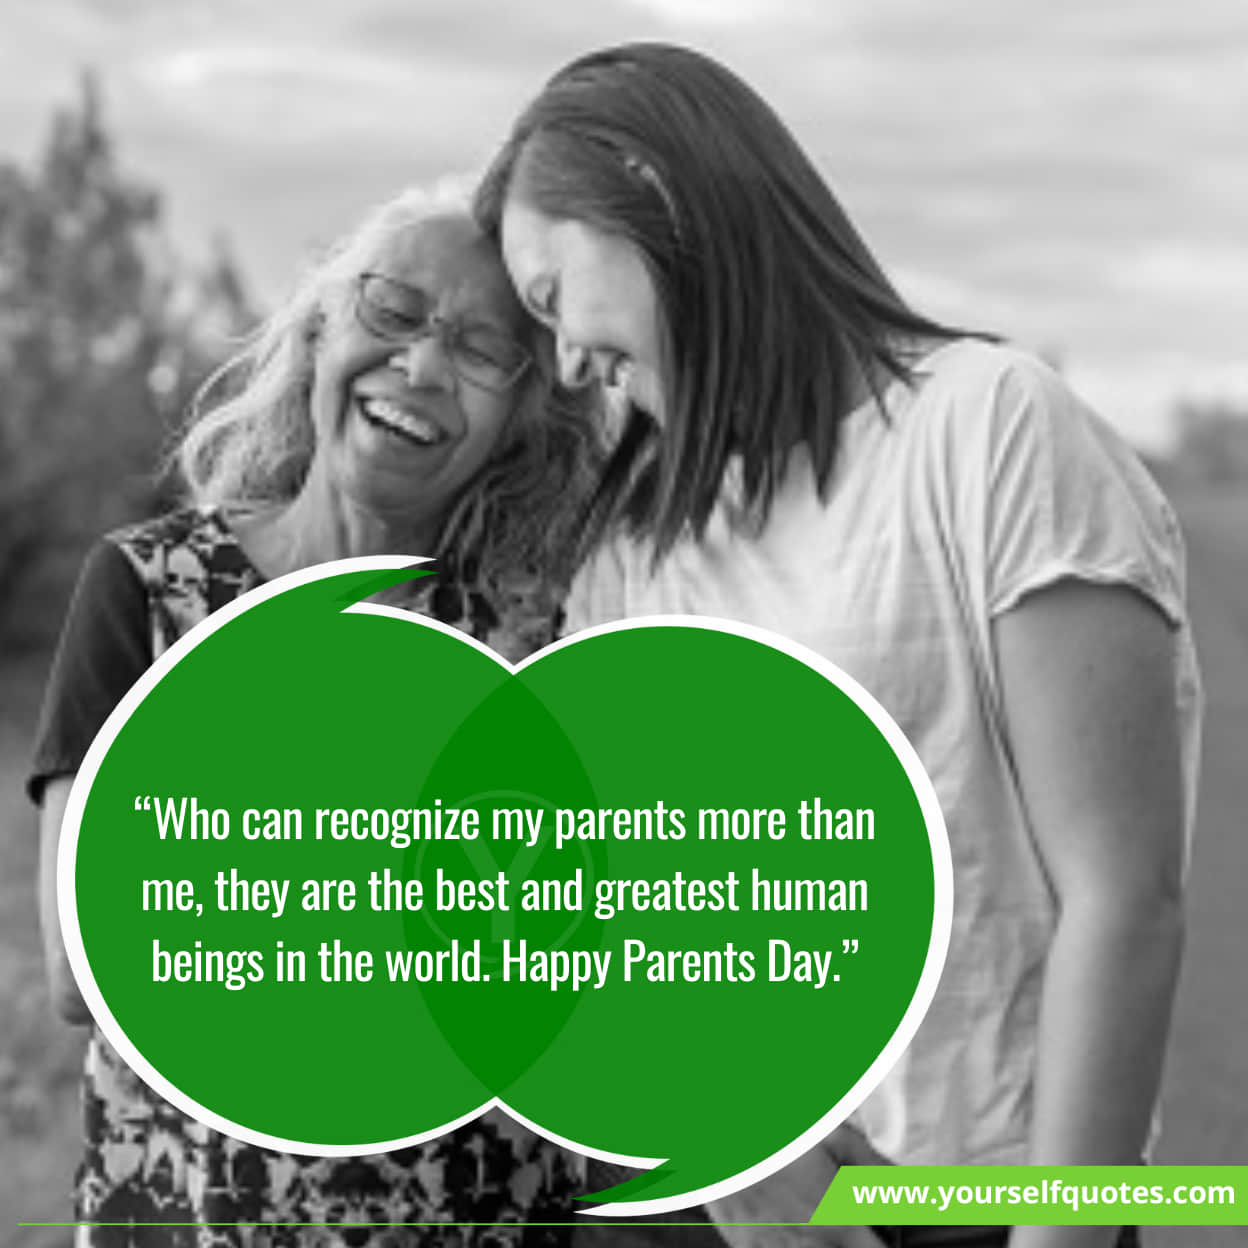 Expressing love and appreciation to parents